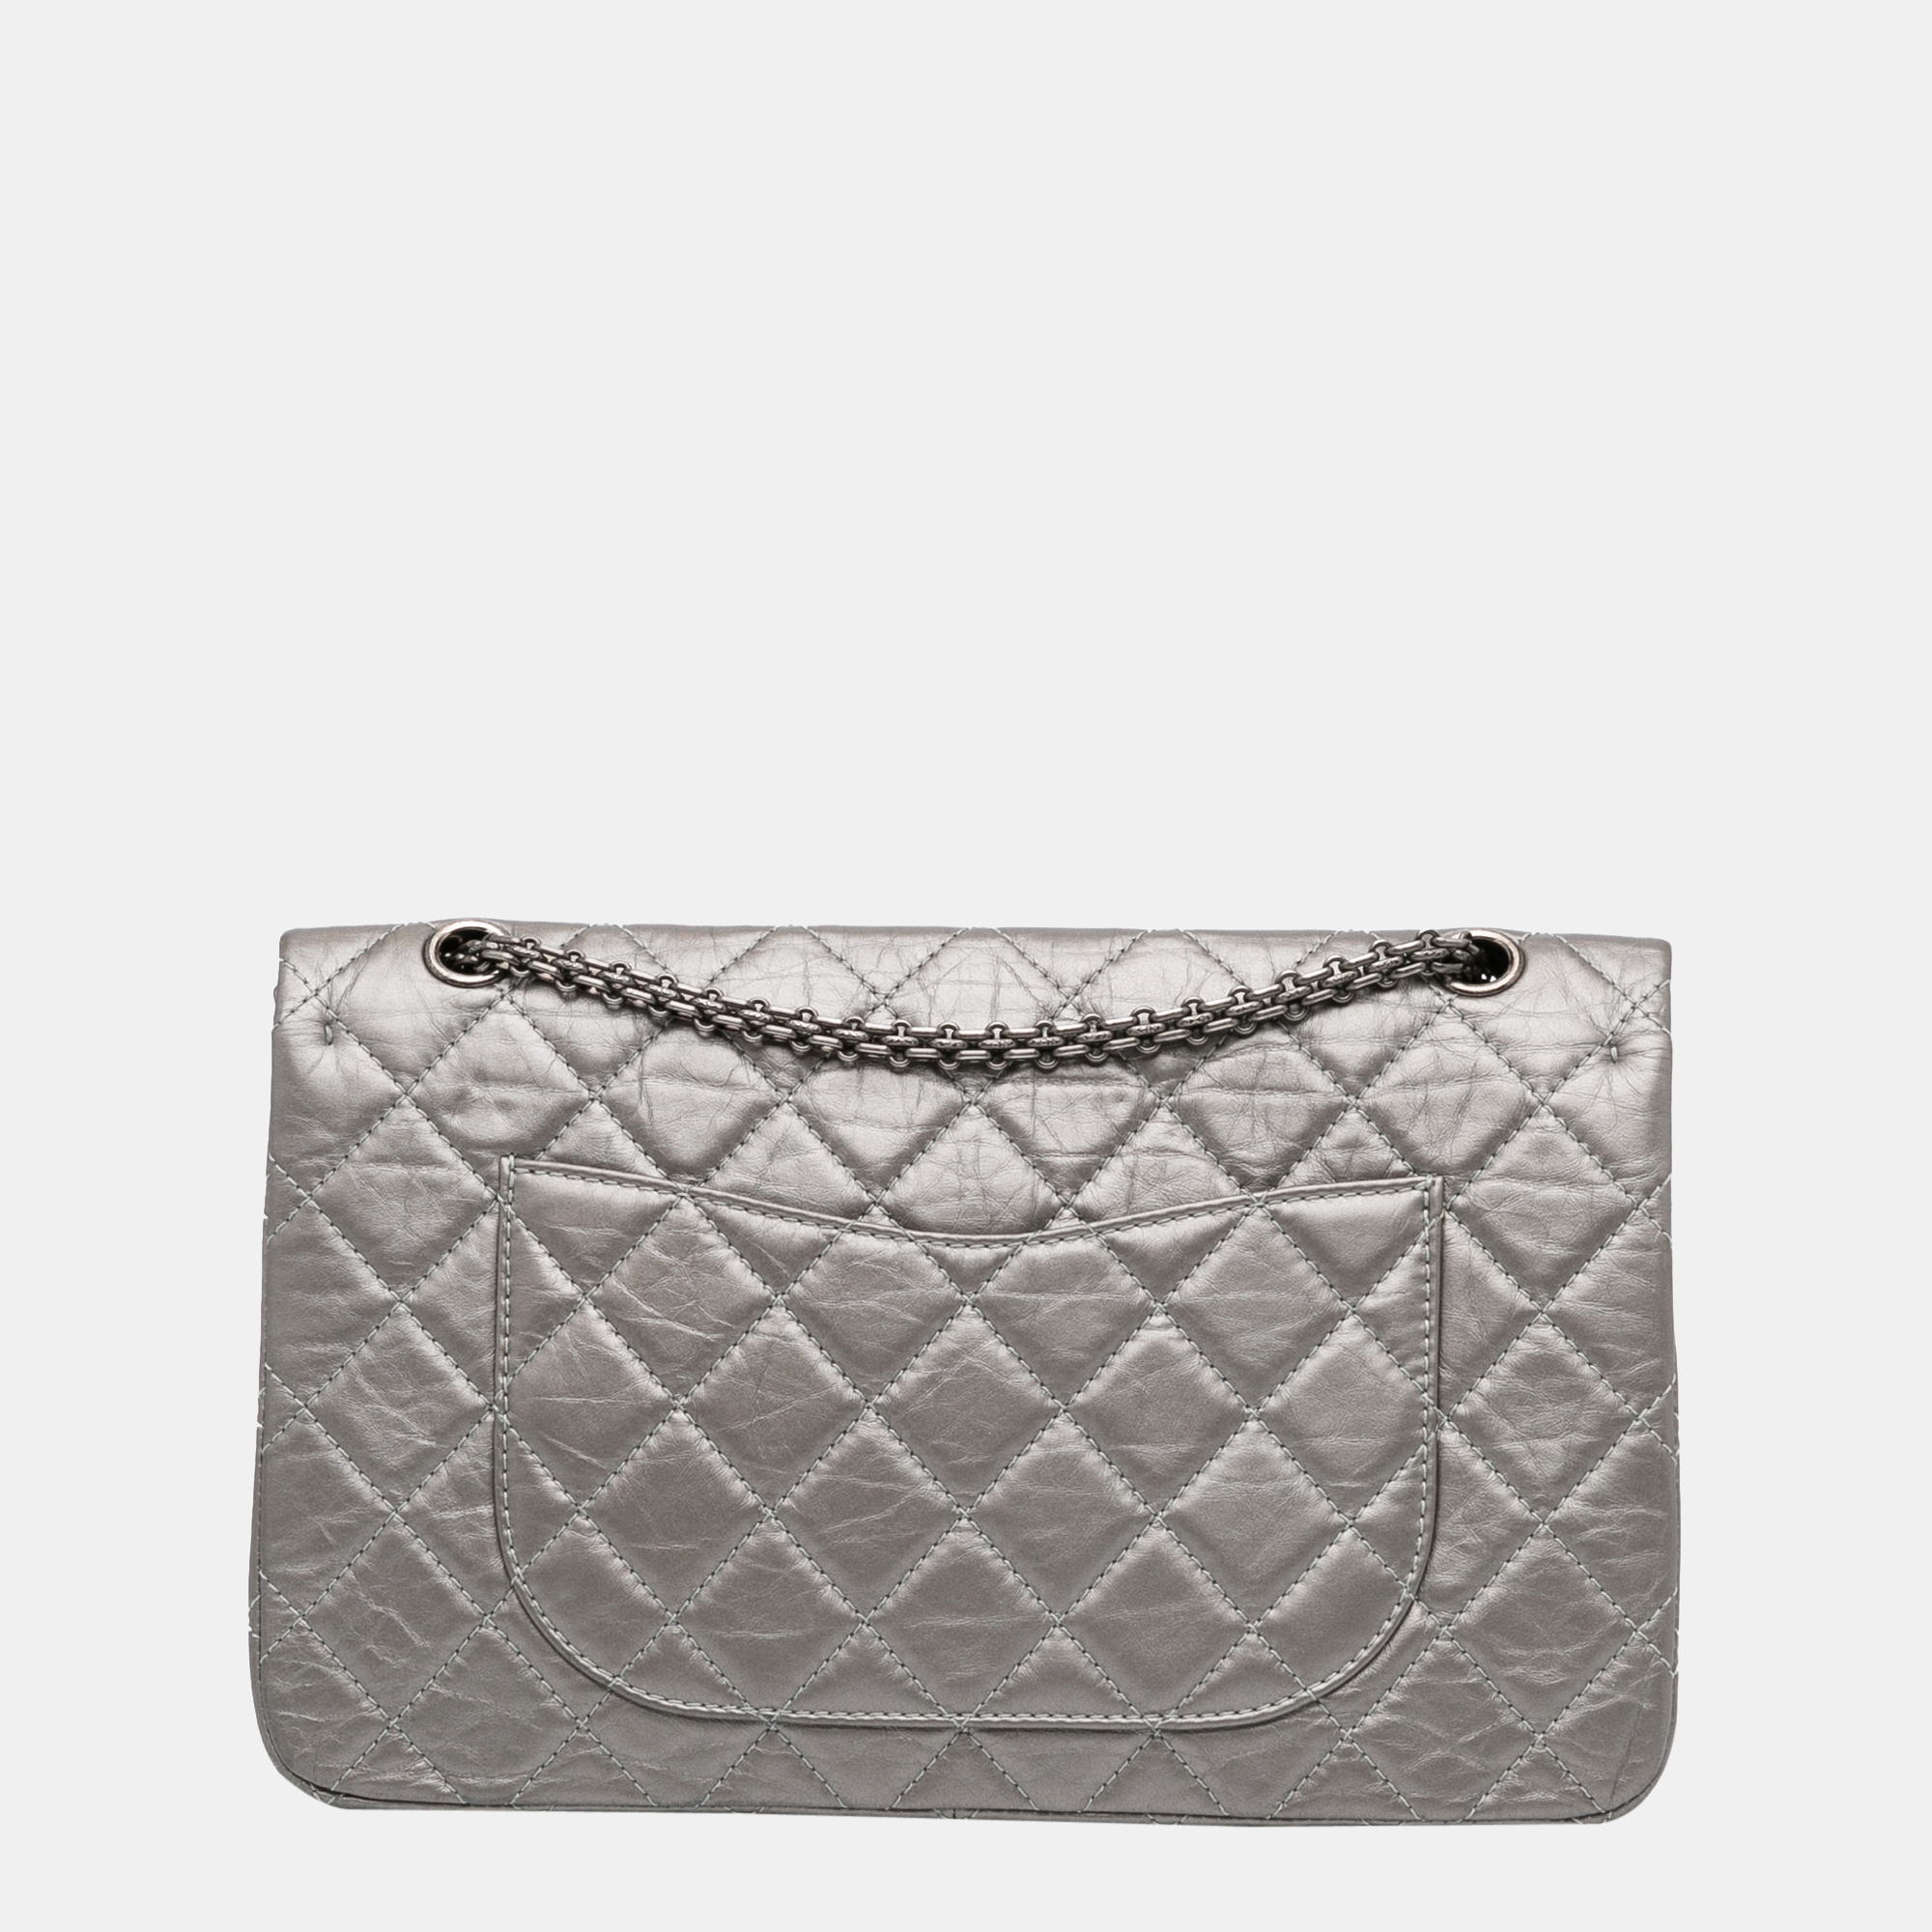 Chanel Silver Reissue 2.55 Aged Calfskin Double Flap 227